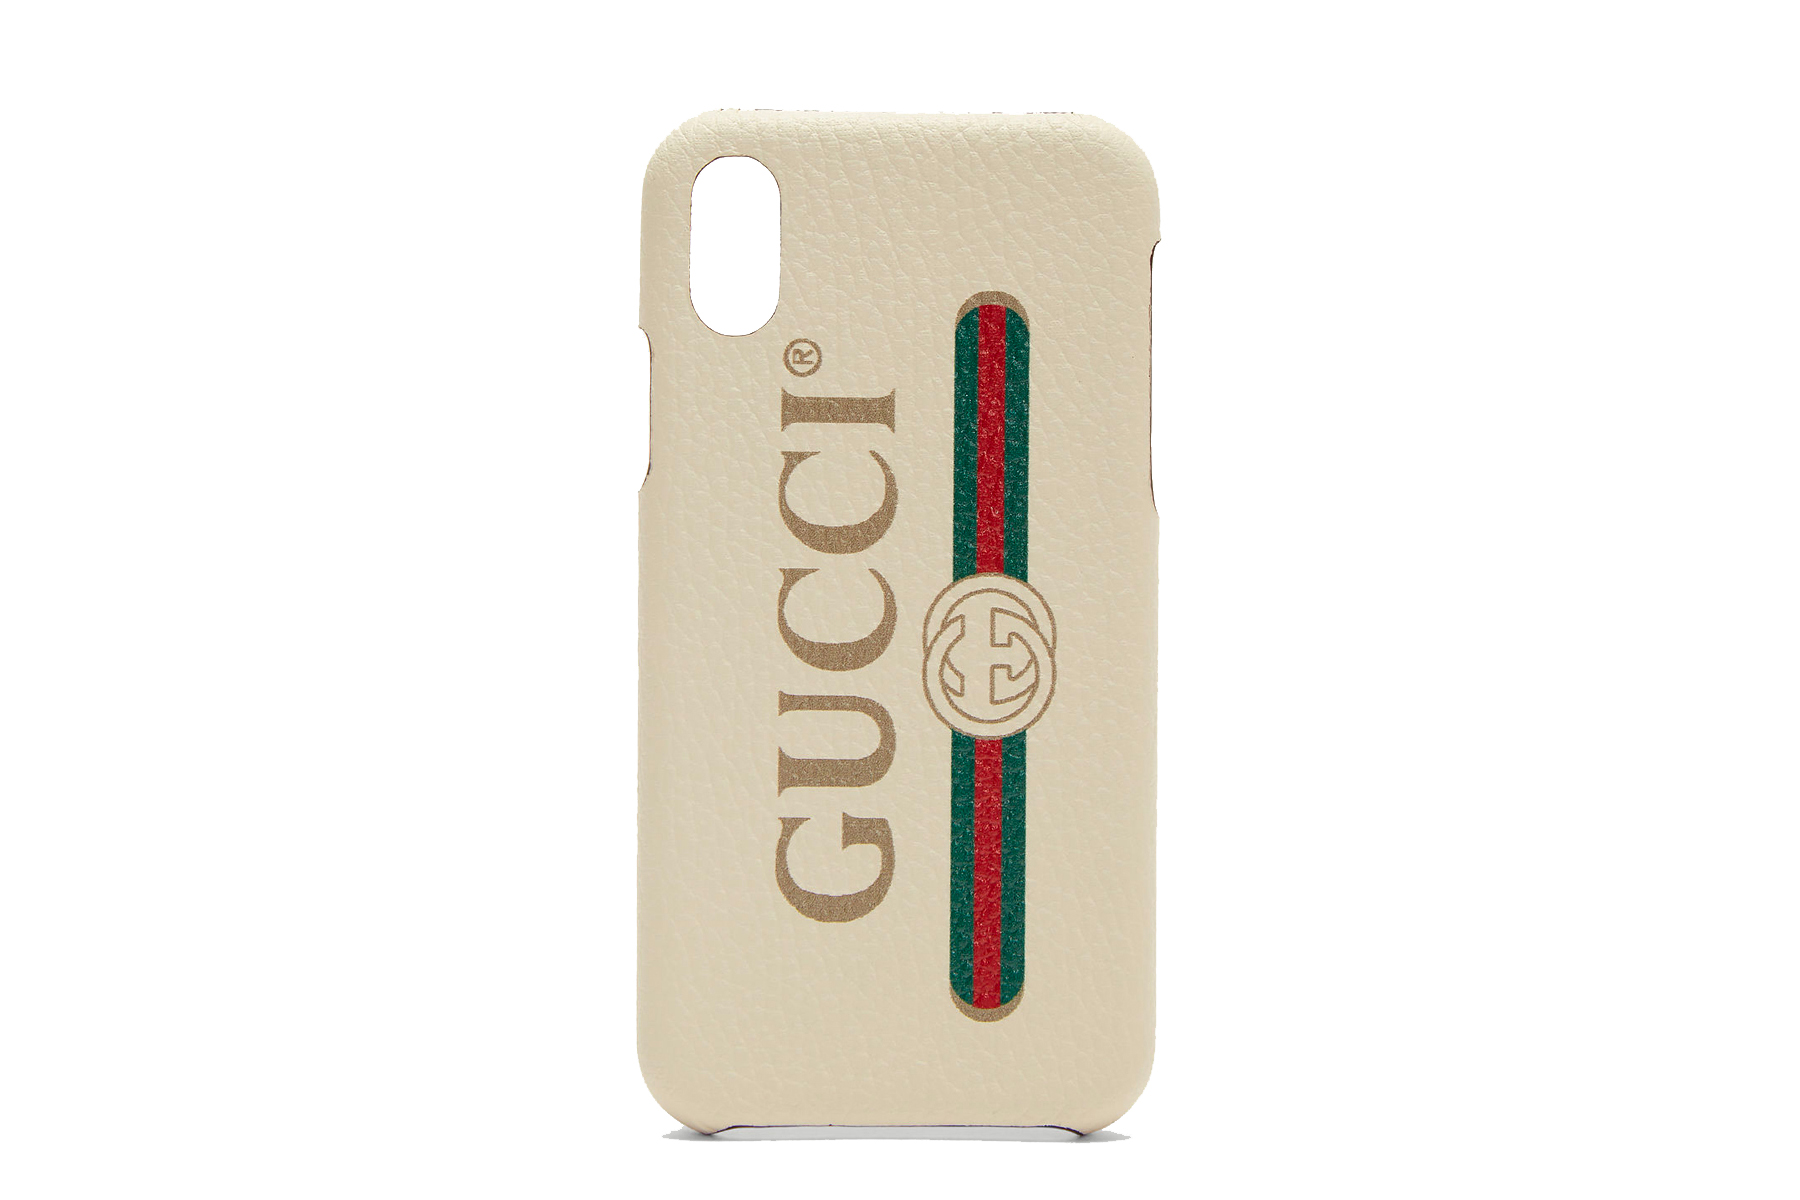 New Auth GUCCI iPhone Case Guccy Logo Phone #519696 Moon/Star